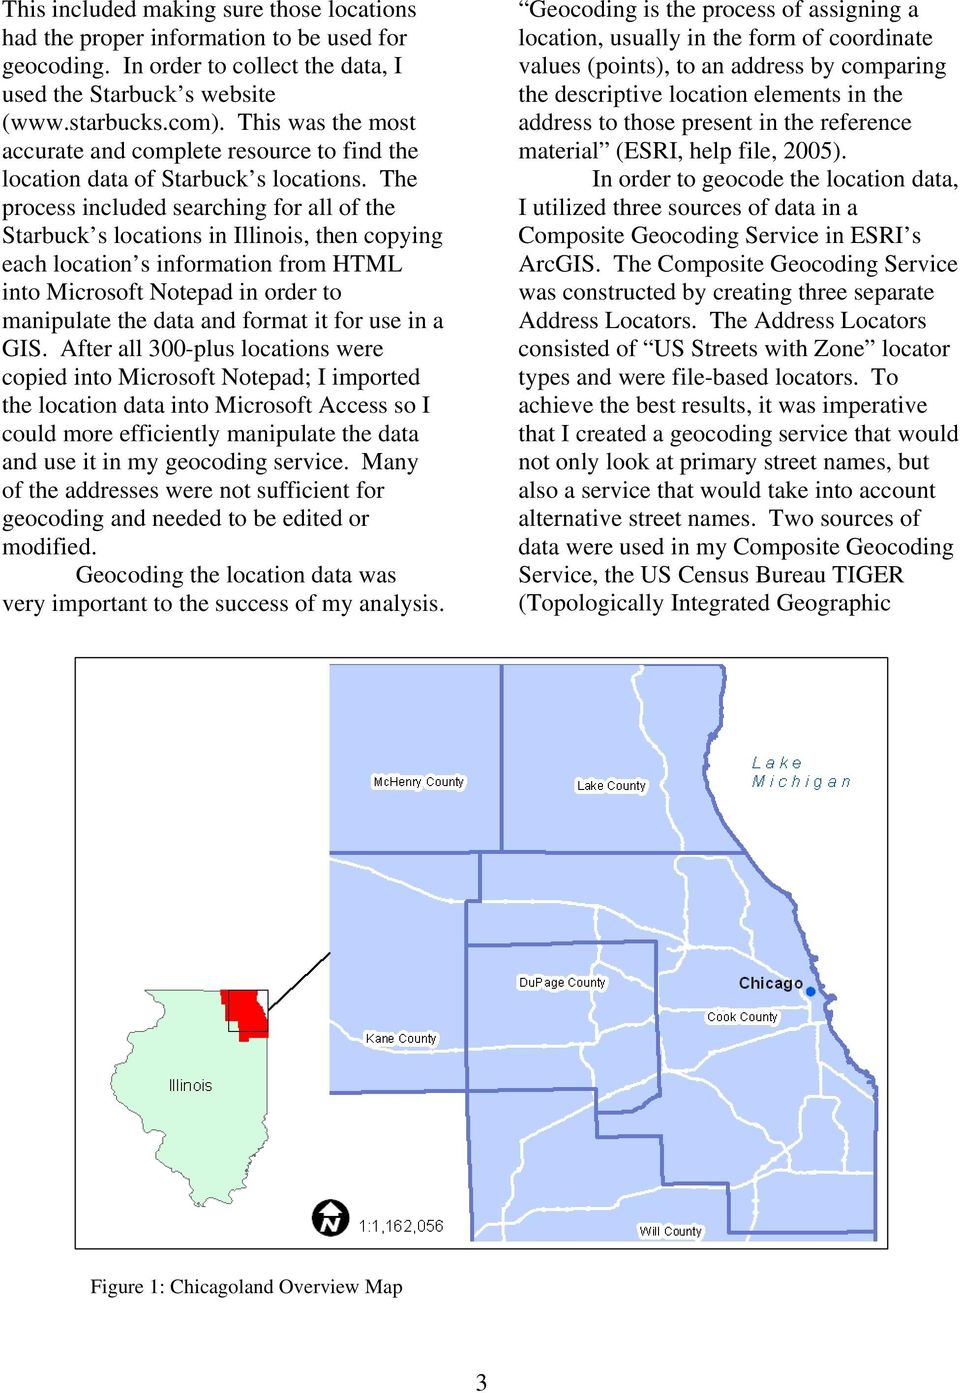 The process included searching for all of the Starbuck s locations in Illinois, then copying each location s information from HTML into Microsoft Notepad in order to manipulate the data and format it